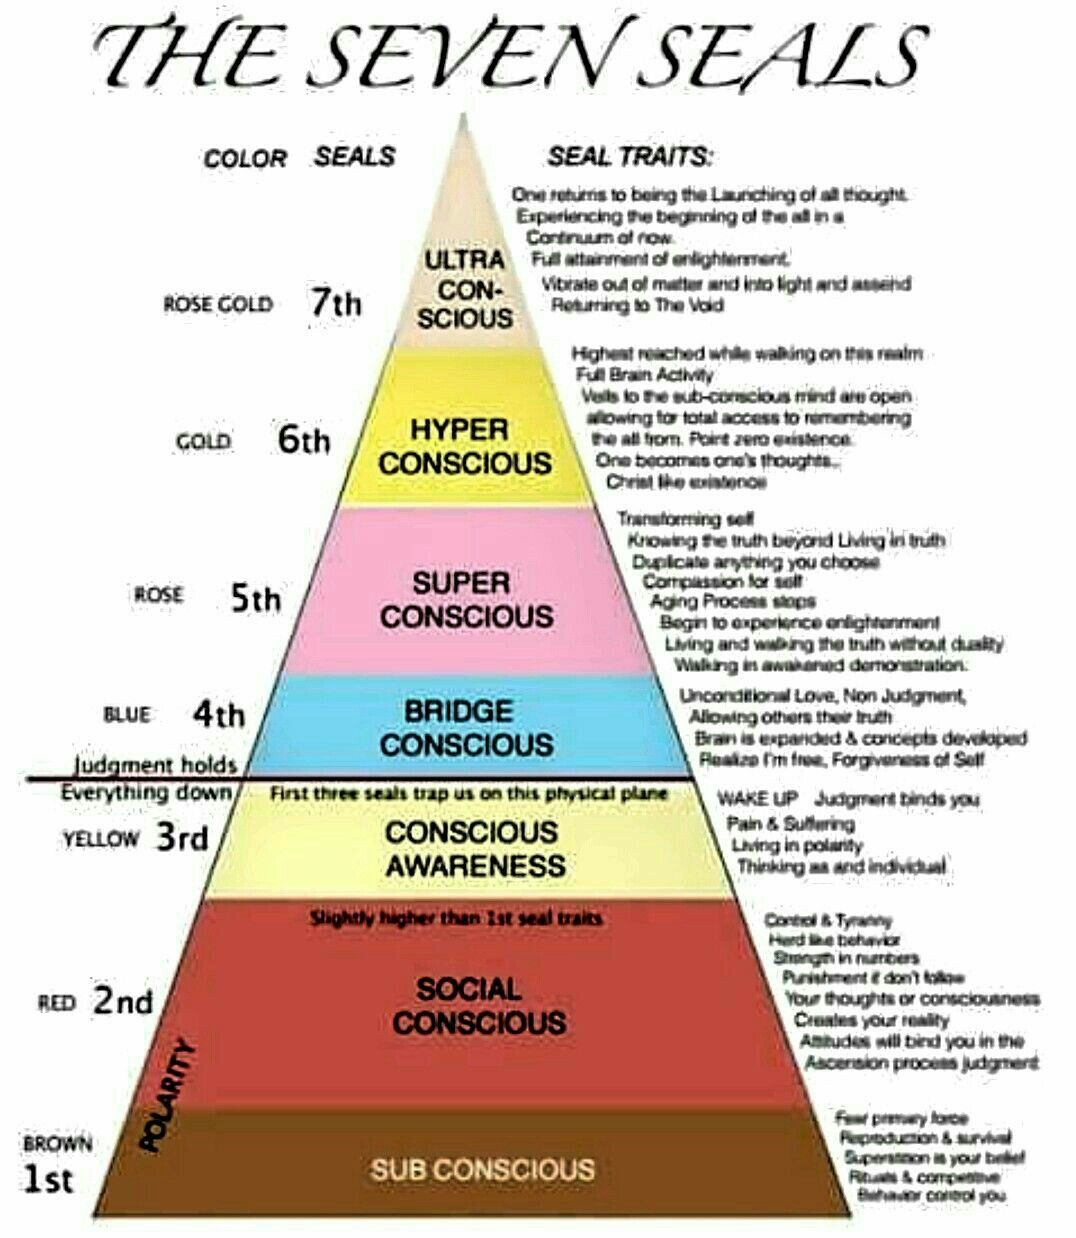 Jungian psychology equates Kundalini arousal with the seven stages of transmutation of metals [=activating/transmuting the seven chakras] in the attainment of the coveted Philosopher’s Stone, described in ancient alchemical texts. Halligan showed how the raising of Kundalini to the crown chakra at the top of the head essentially equates with alchemical “conjunctio”, the mystical marriage of opposites in any spiritual journey which makes union with the Divine a subjective reality, where the Self is fully formed. “A conjunctio metaphorically creates the Philosopher’s Stone, the Self, unity with the Divine. Therefore, for many Jungians the experience of Kundalini awakening is the Eastern version of individuation [coming into Self-hood].”¨